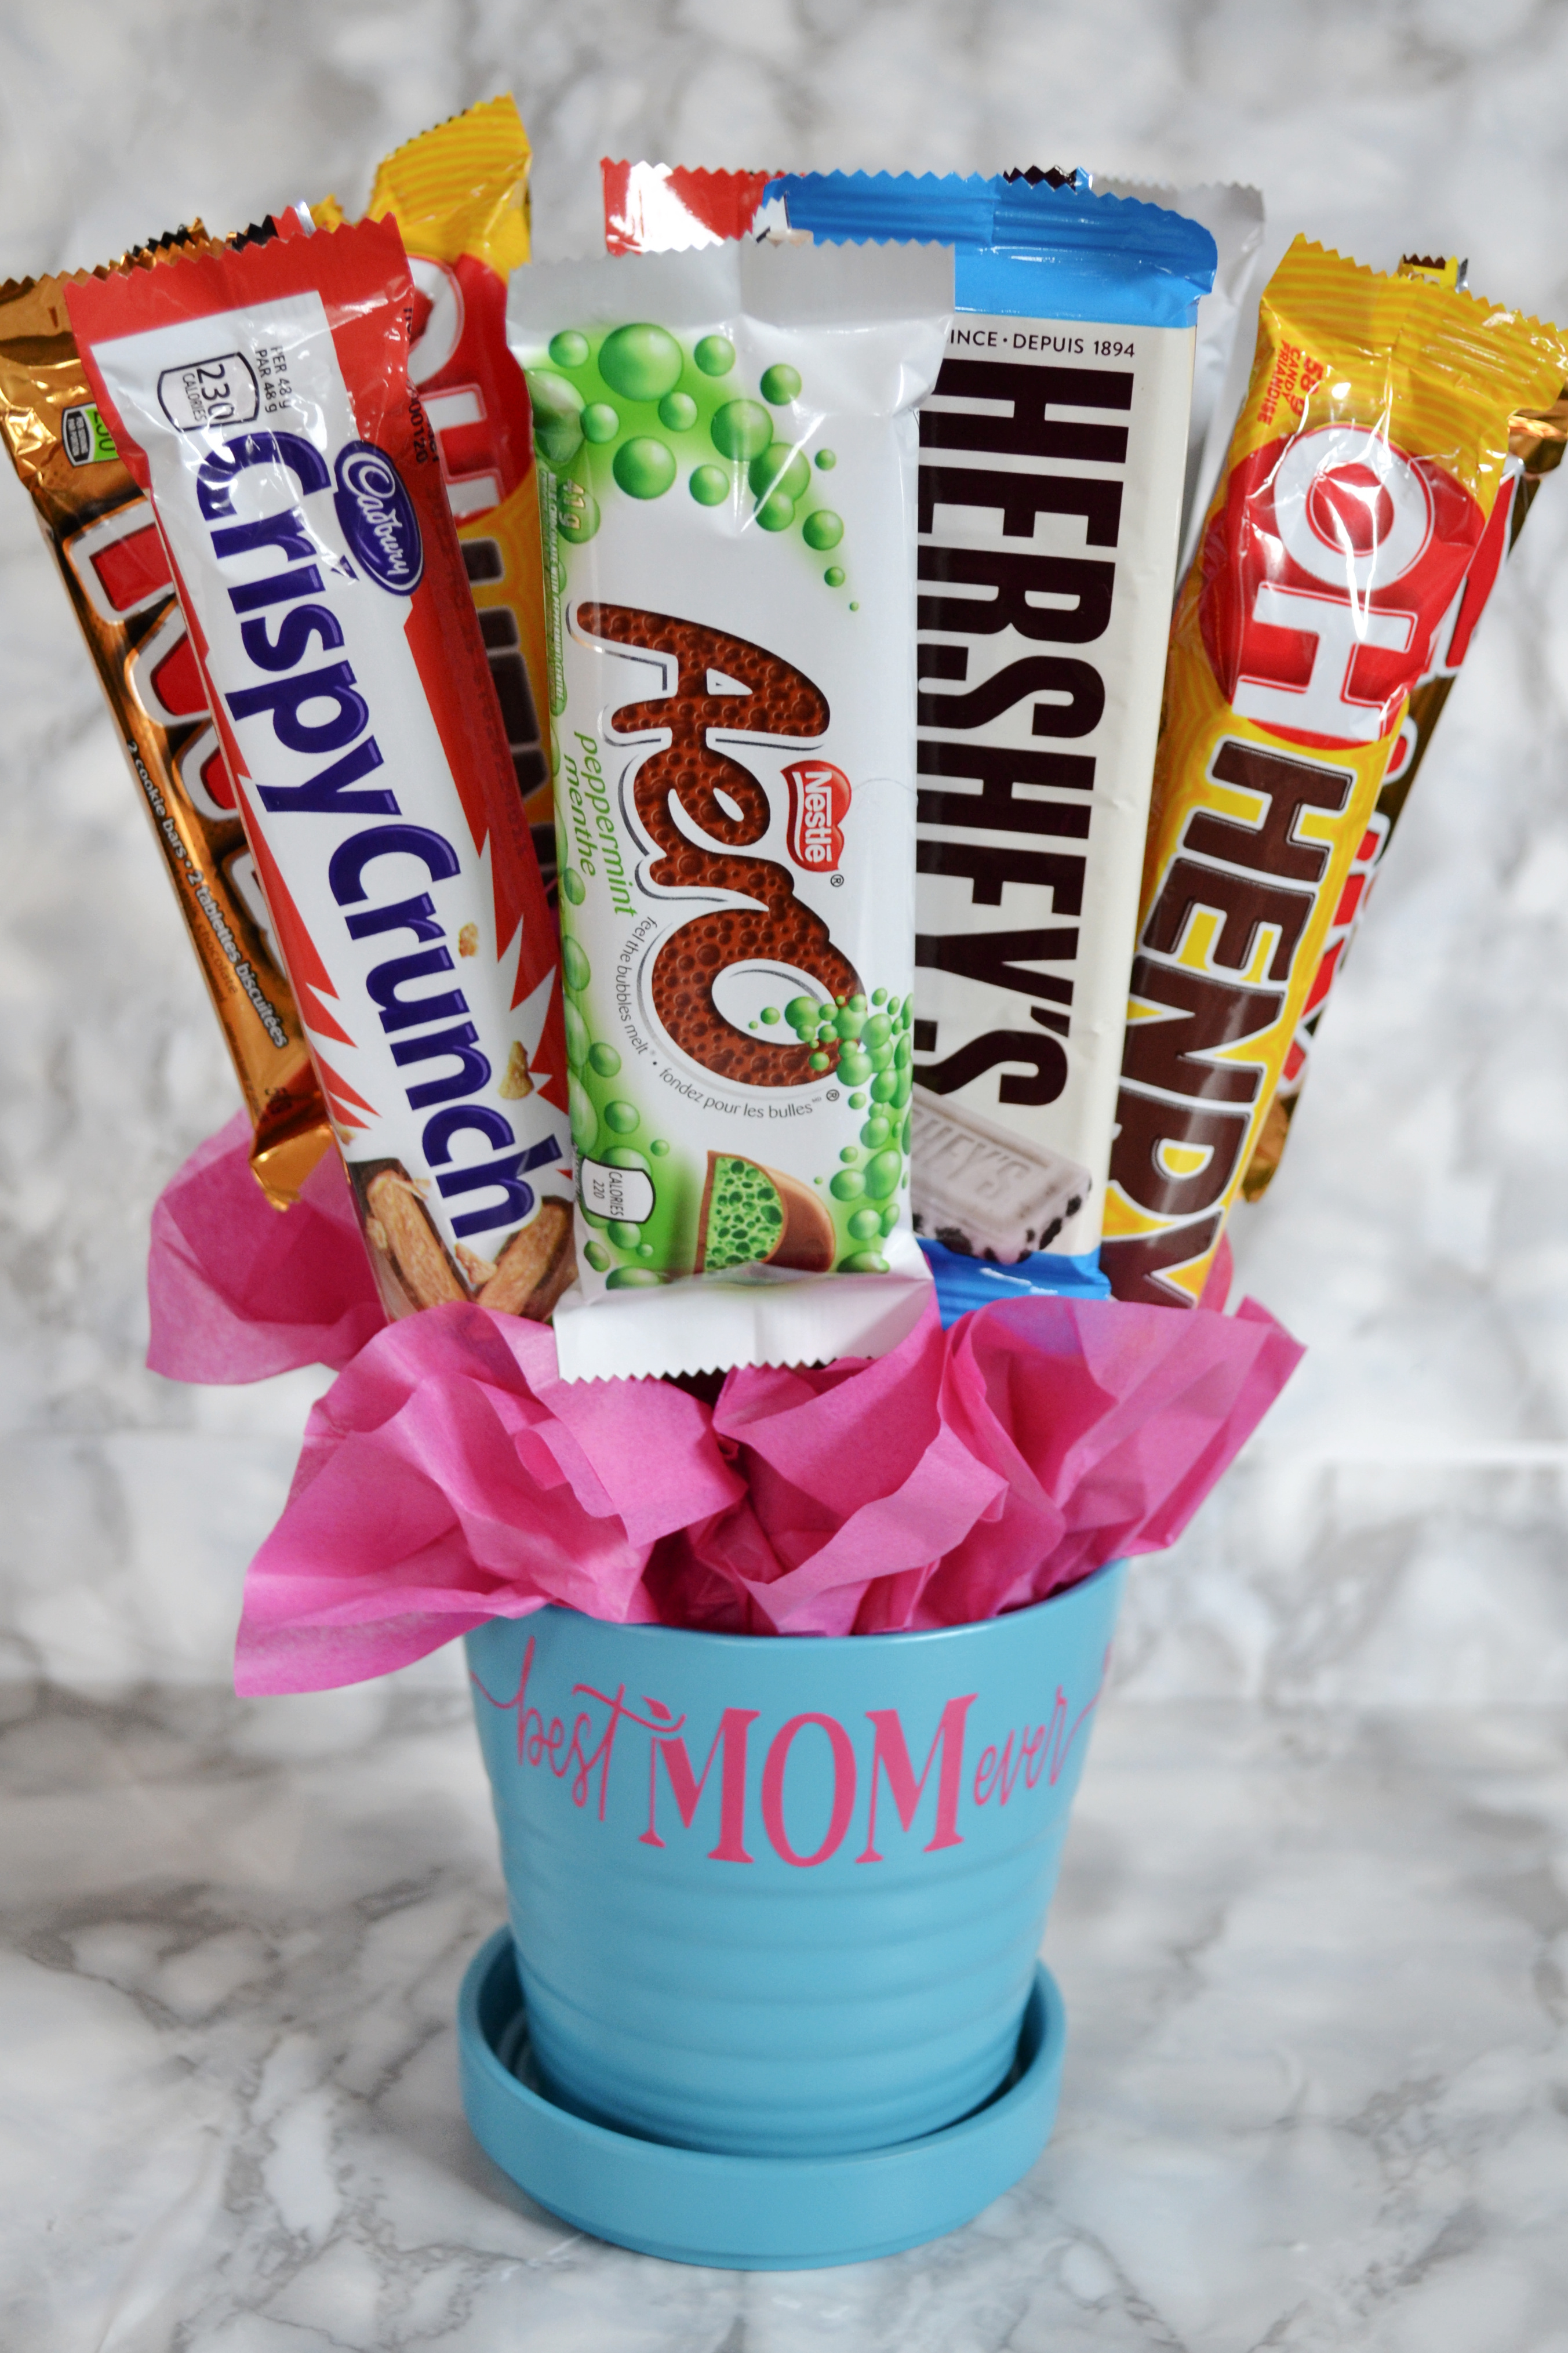 DIY Mother's Day gift for the crazy dog mom! – Basil's Travels